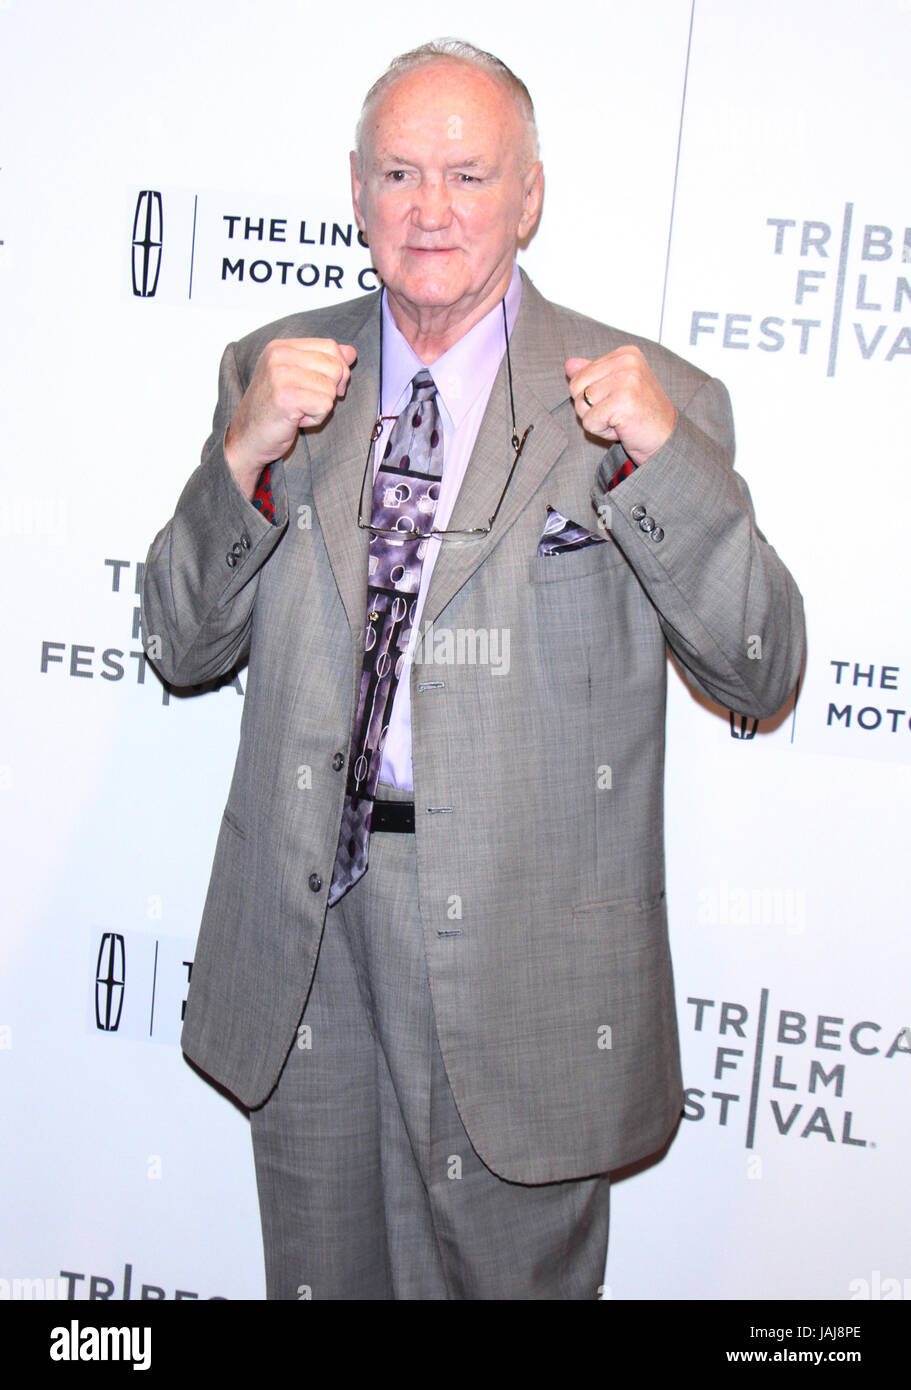 2017 Tribeca Film Festival - 'Chuck' - Premiere  Featuring: Chuck Wepner Where: New York, United States When: 28 Apr 2017 Credit: RWong/WENN.com Stock Photo